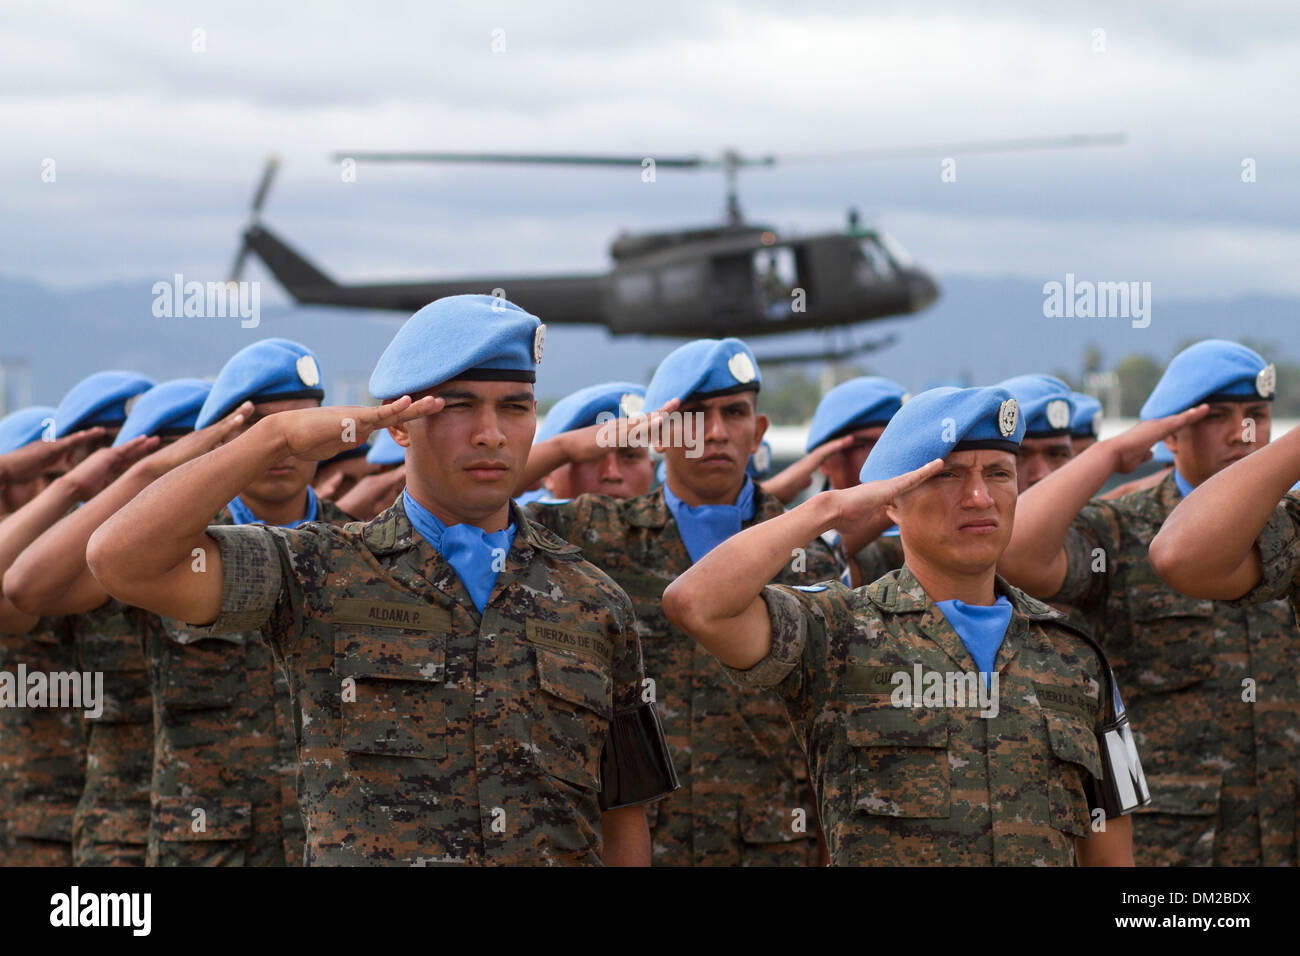 Guatemala City, Guatemala. 10th Dec, 2013. Soldiers of the United Nations Stabilization Mission in Haiti (MINUSTAH) of Guatemalan Army participate in a parade to commemorate the 92nd anniversary of the Guatemalan Air Force, in Guatemala City, capital of Guatemala, on Dec. 10, 2013. Credit:  Luis Echeverria/Xinhua/Alamy Live News Stock Photo